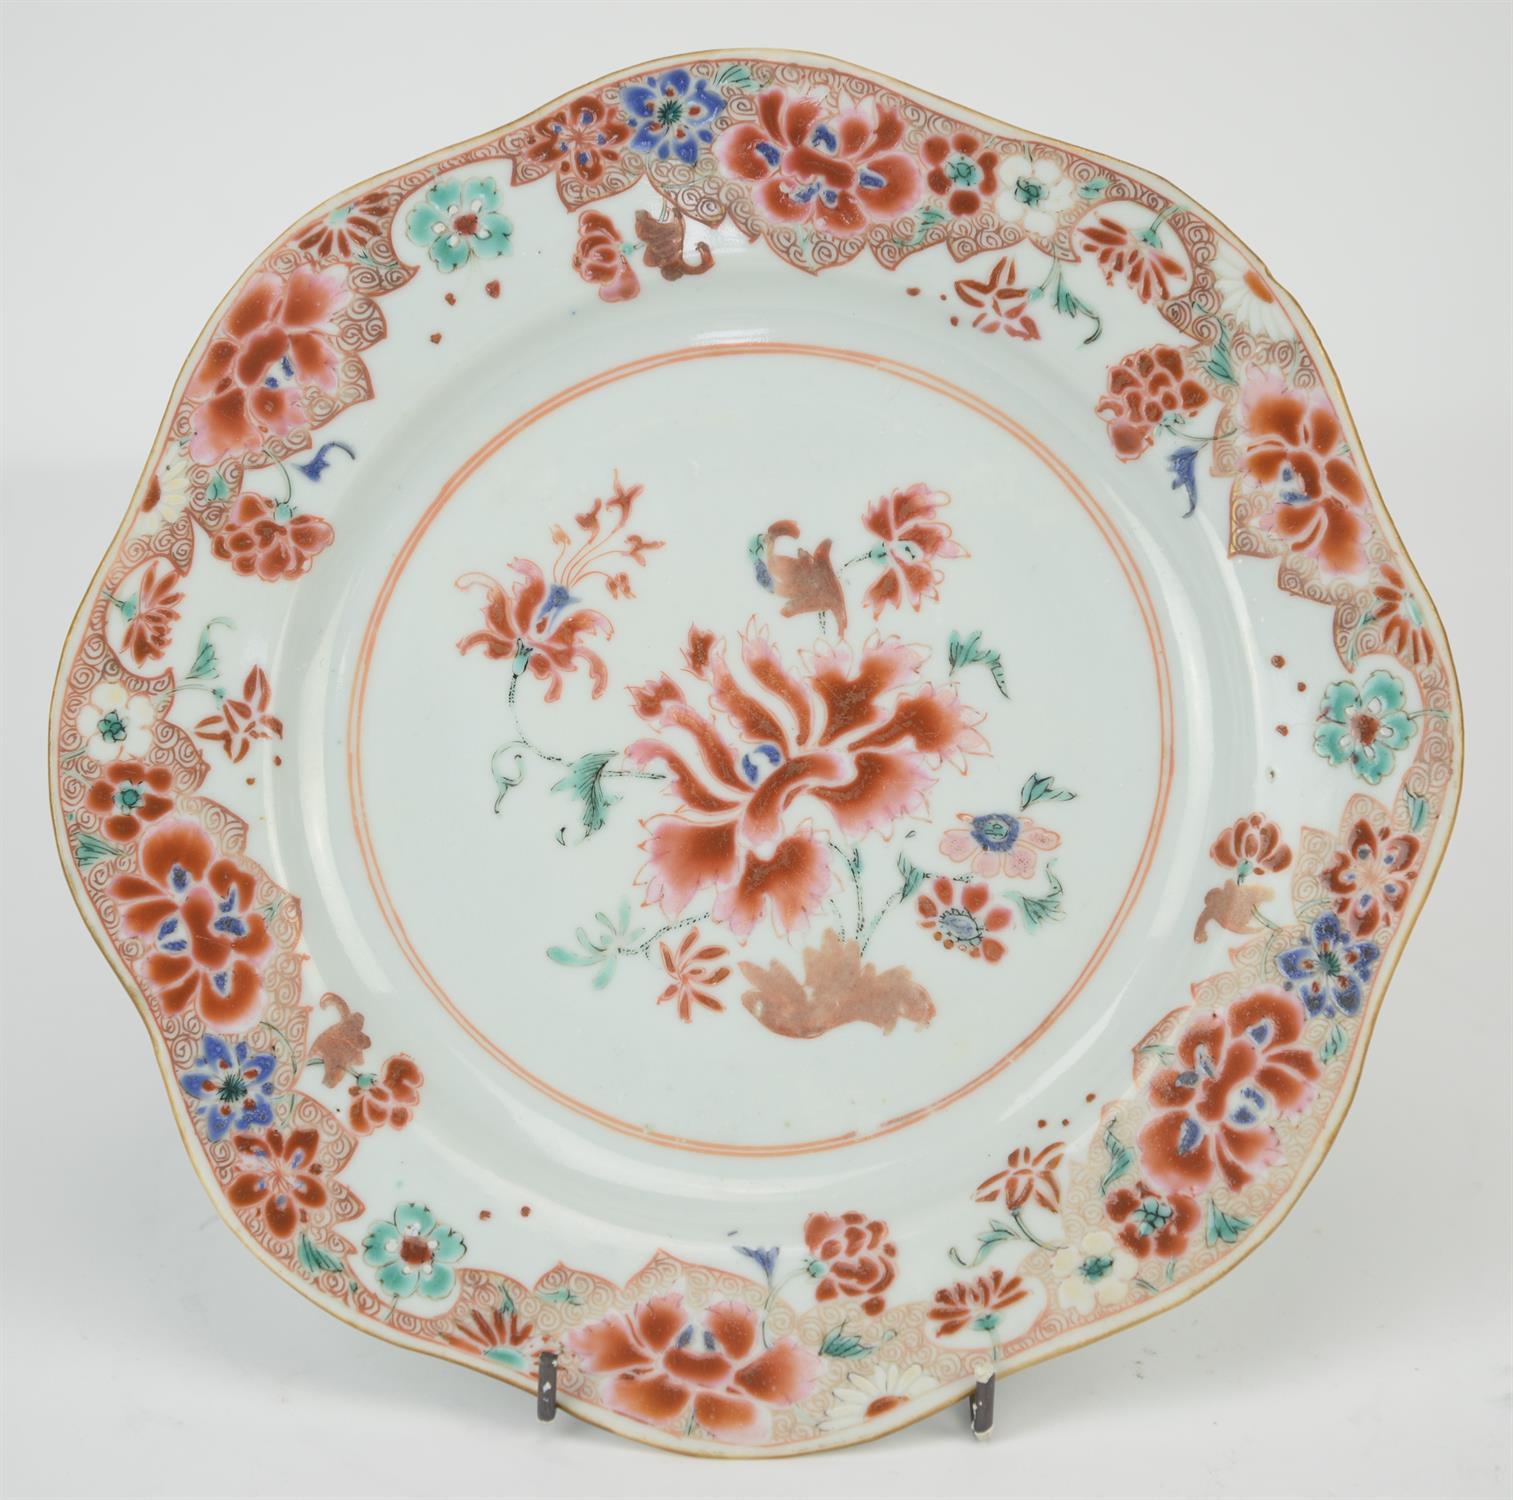 Eight famille rose dishes; each one decorated with floral designs and about 22.5 cm diameter, - Image 26 of 28